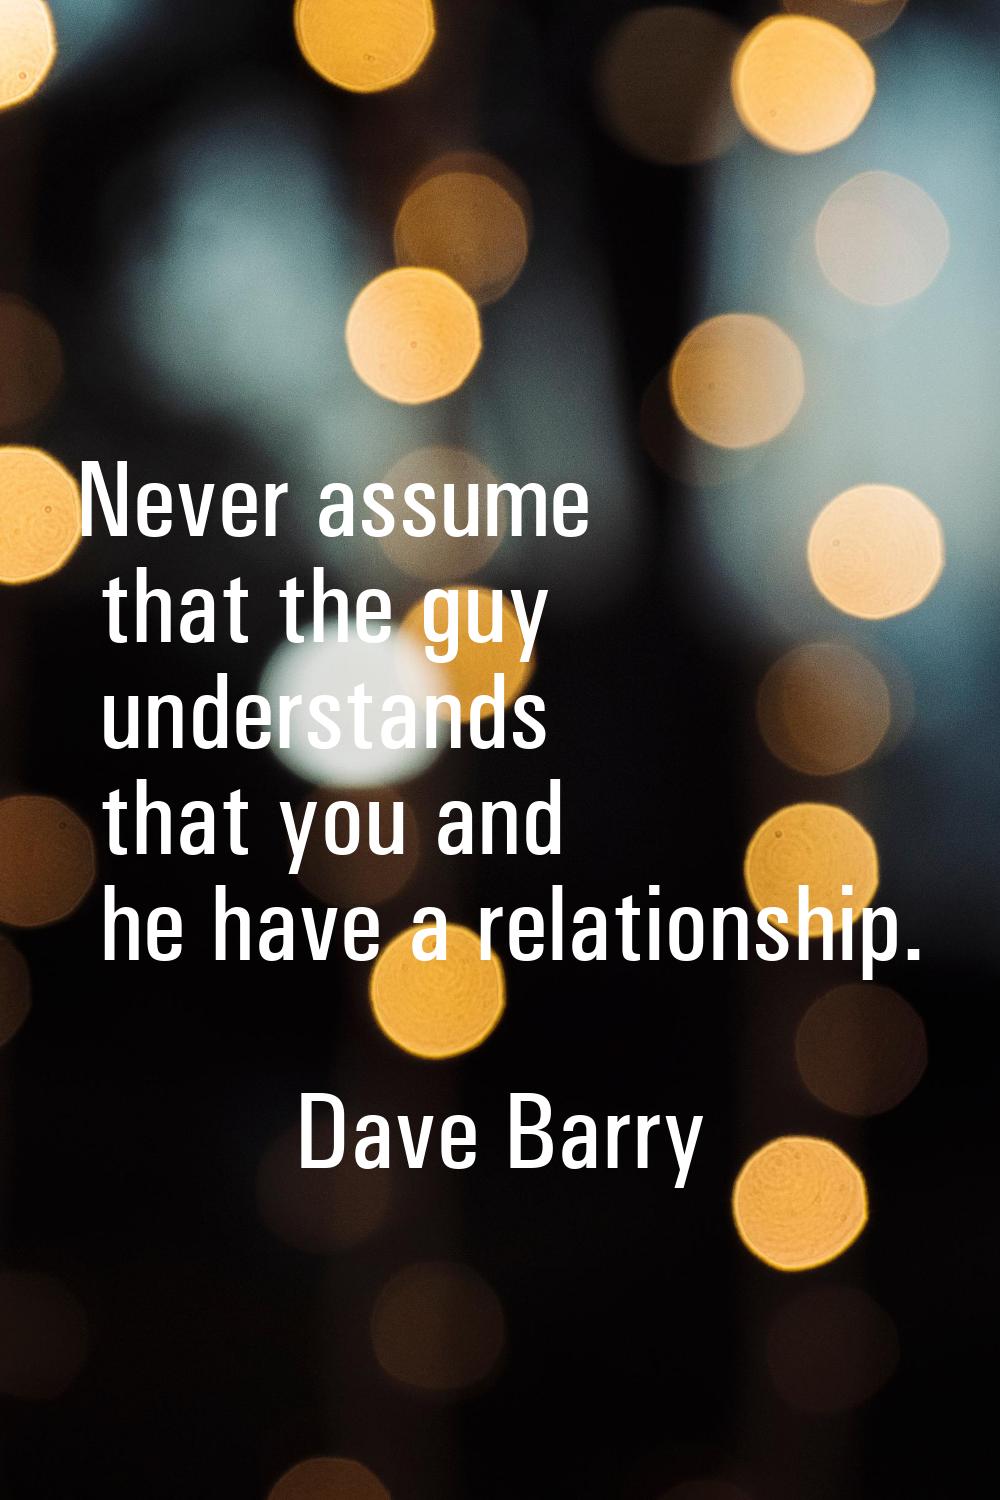 Never assume that the guy understands that you and he have a relationship.